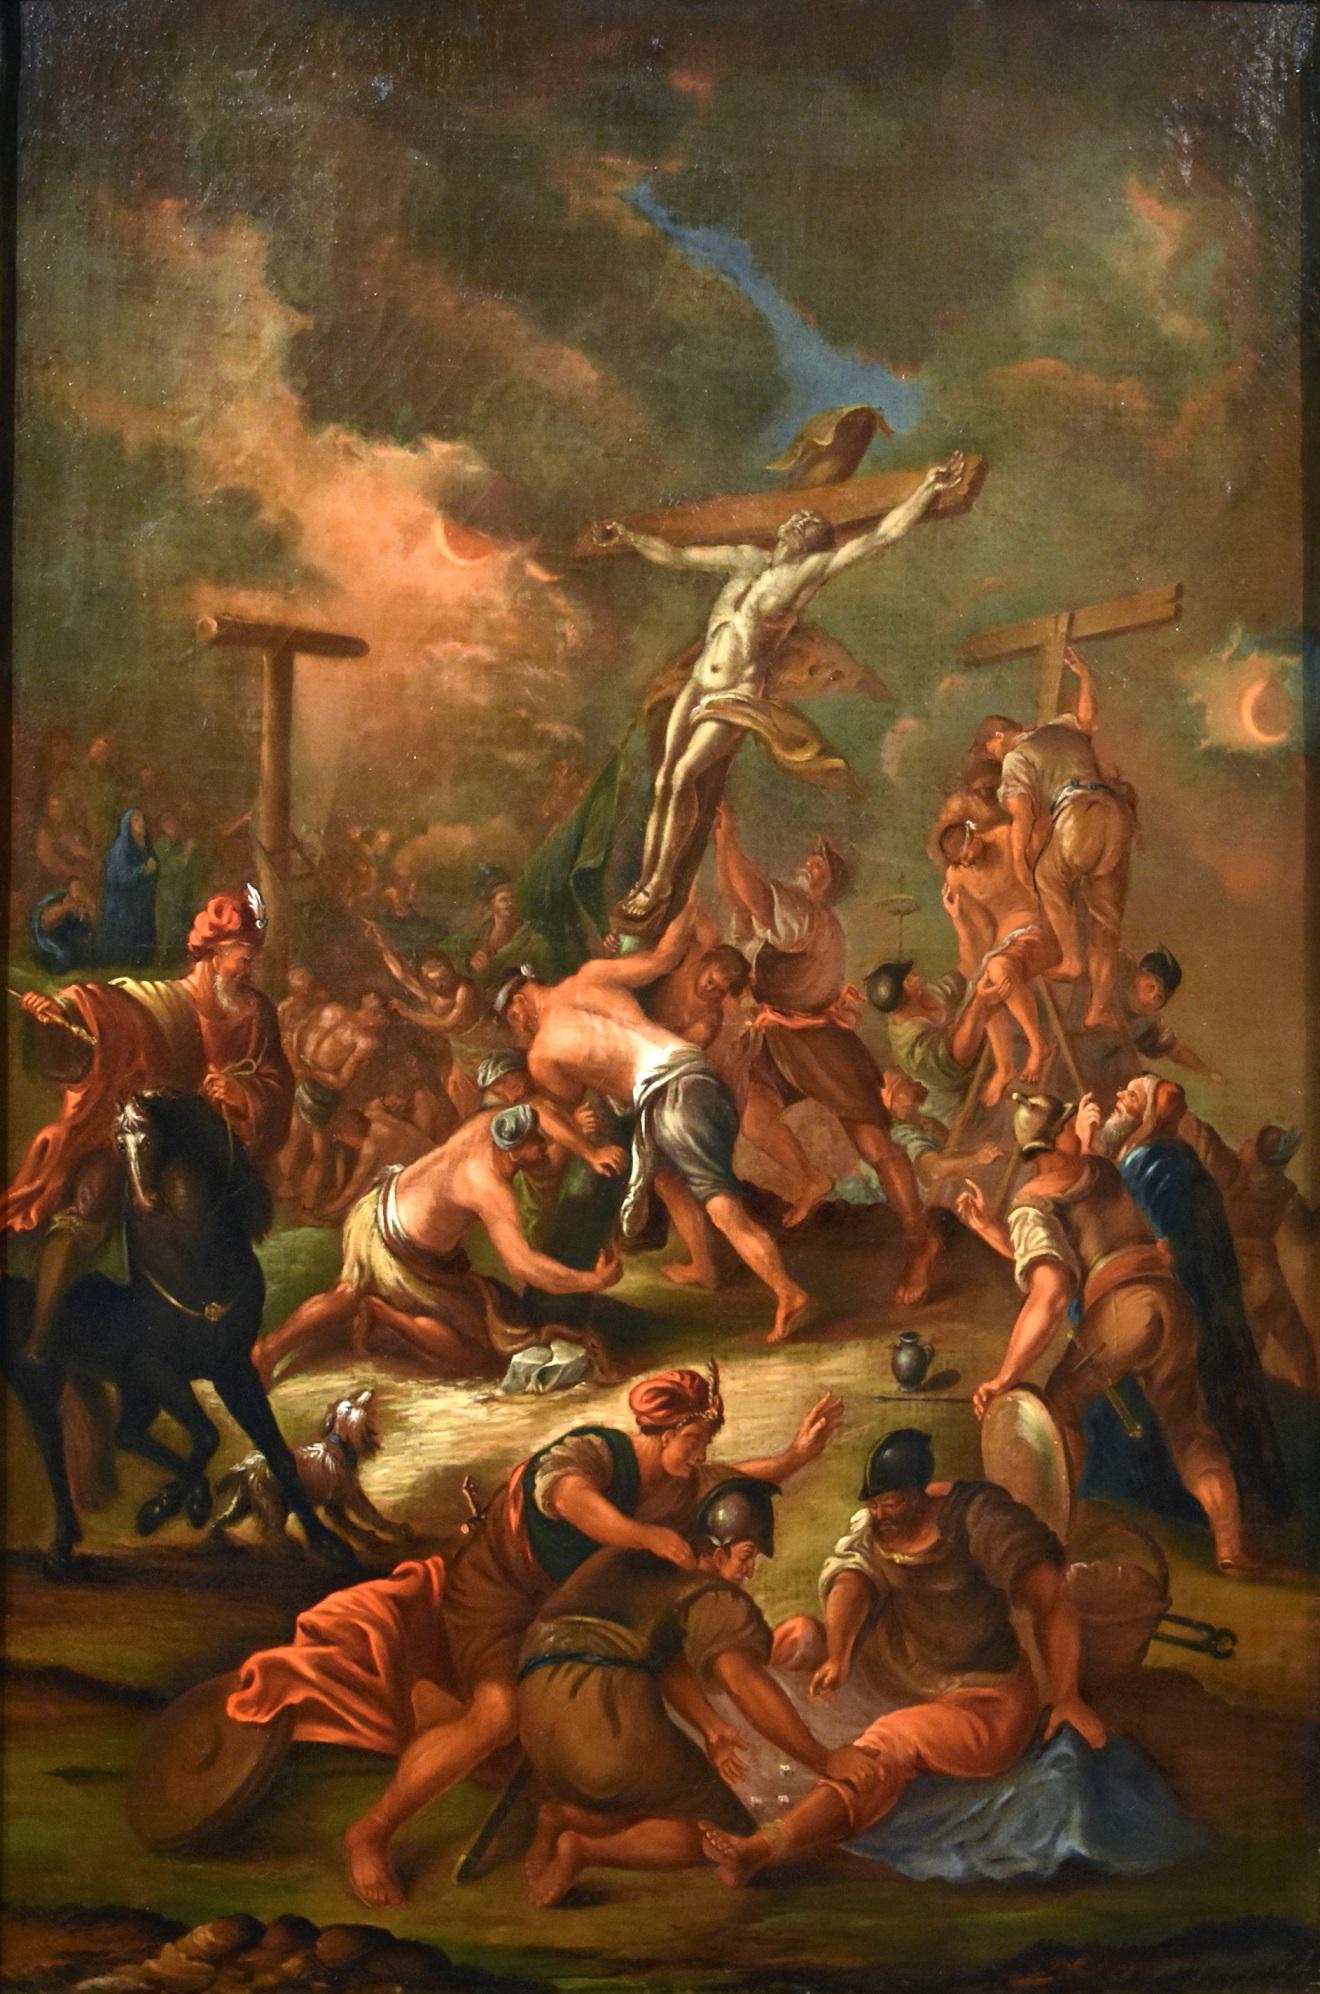 Christ Crucified Old master Paint Oil on canvas  Flemish 17/18th Century Italy  - Painting by Flemish school, late 17th - early 18th century